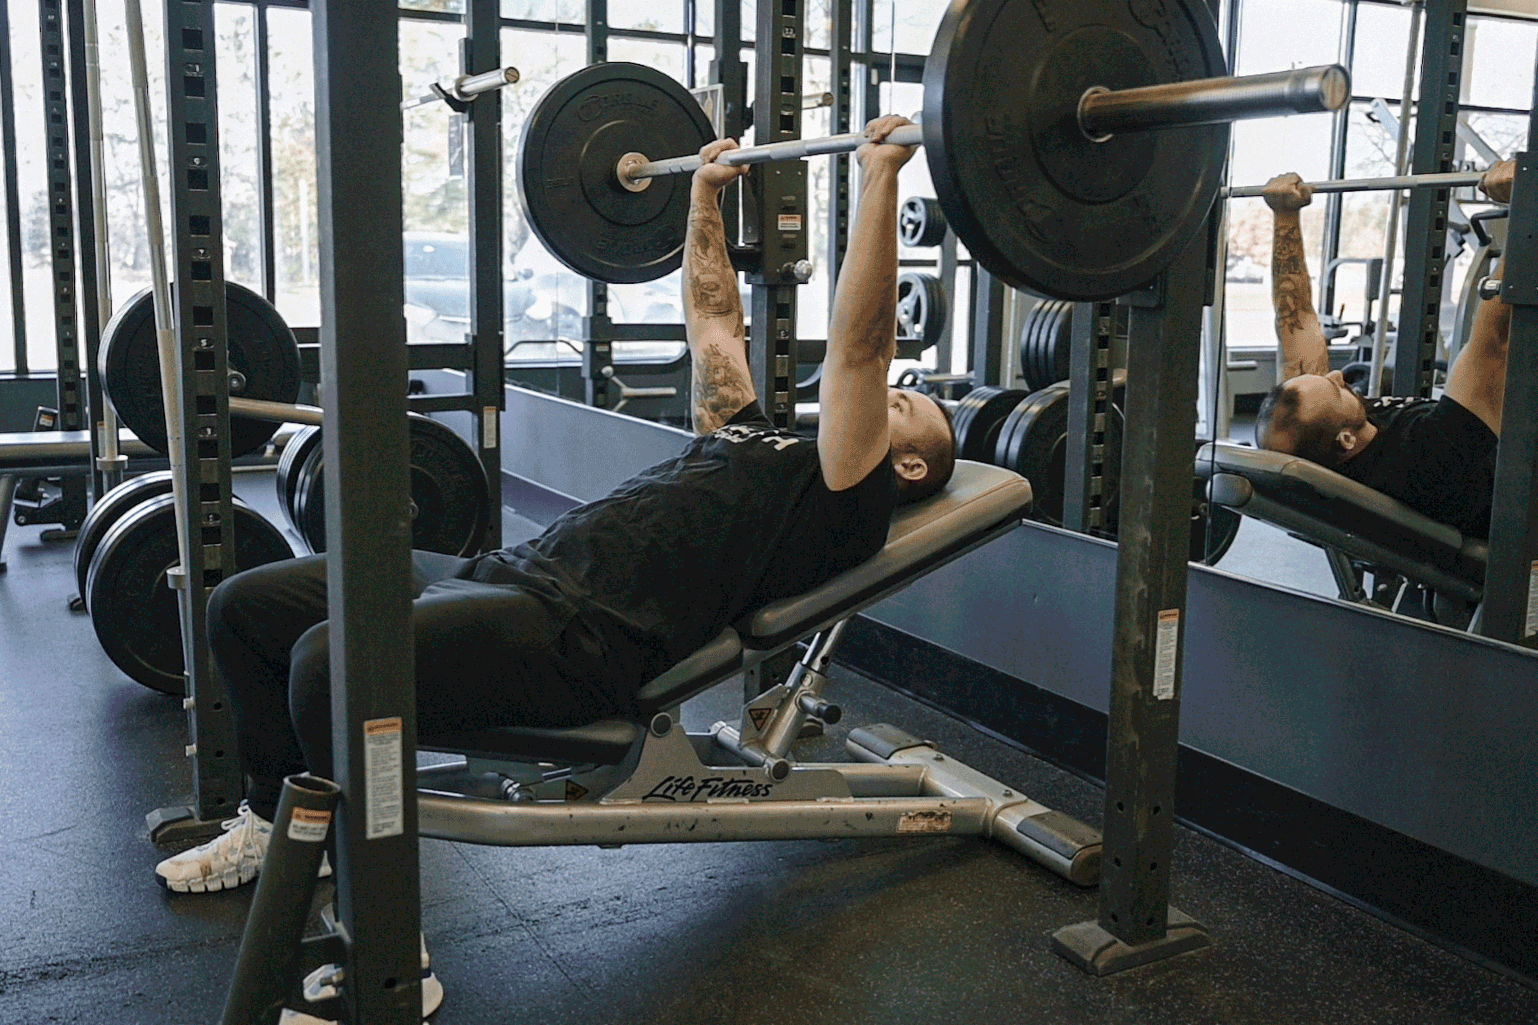 Coach Mike demonstrating an incline barbell bench press in a gym setting.